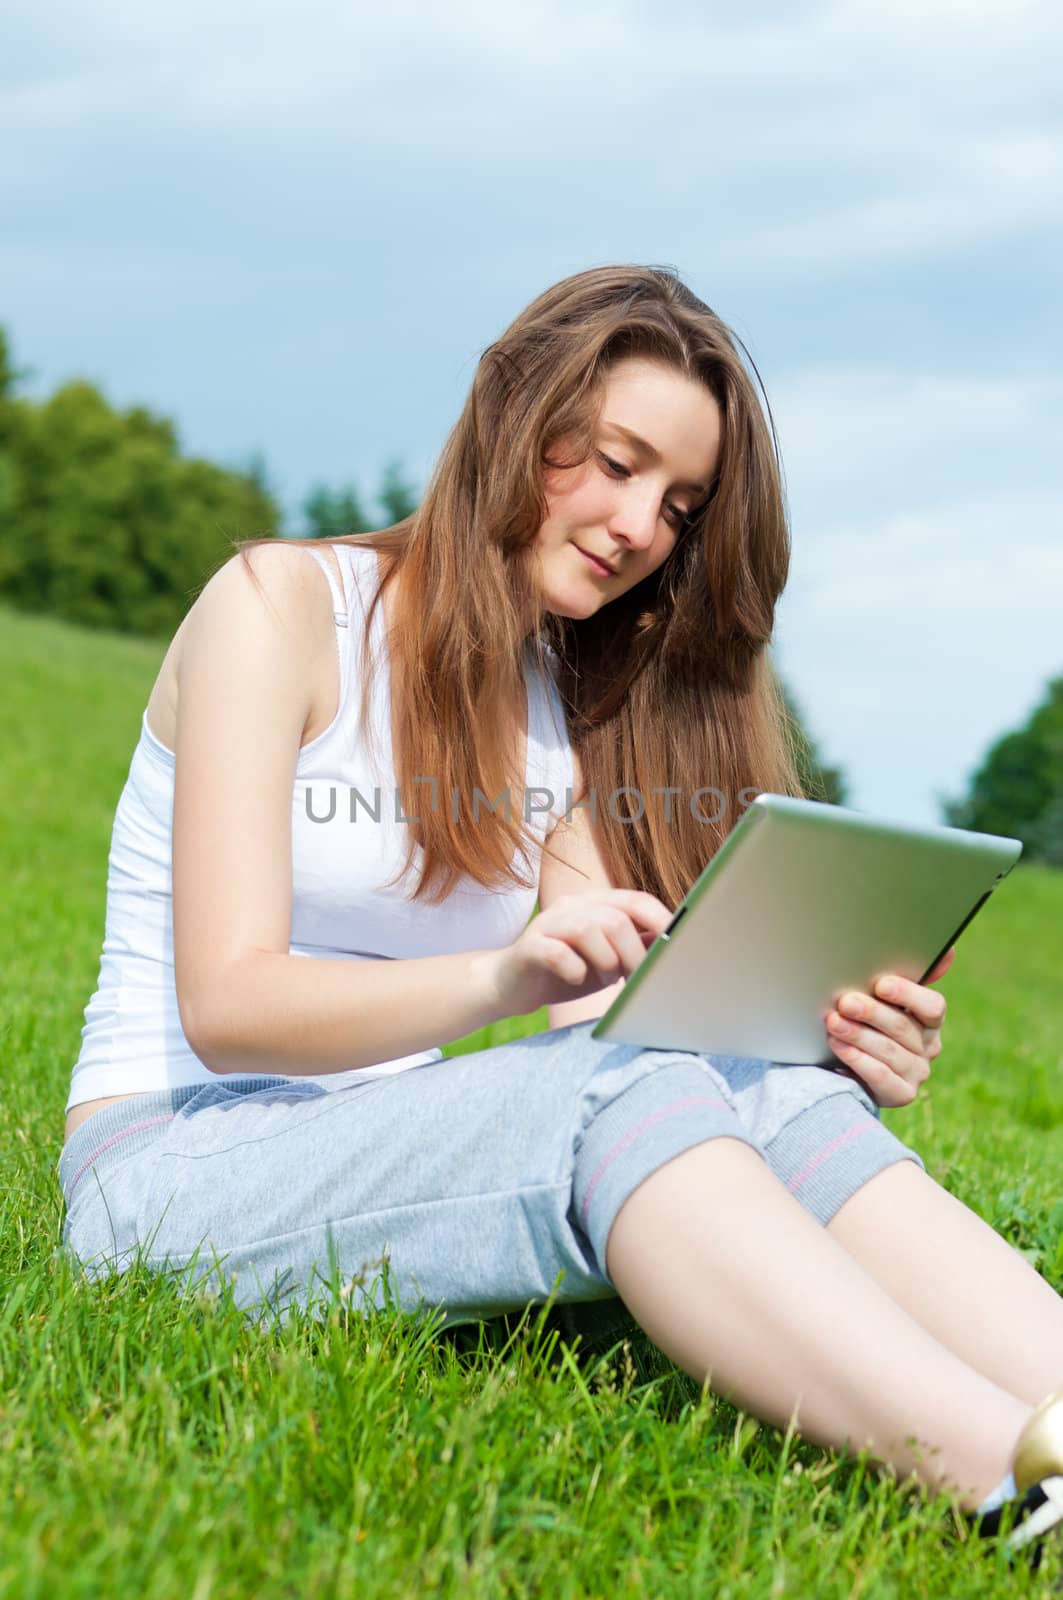 Girl with tablet in park on grass. by BPhoto